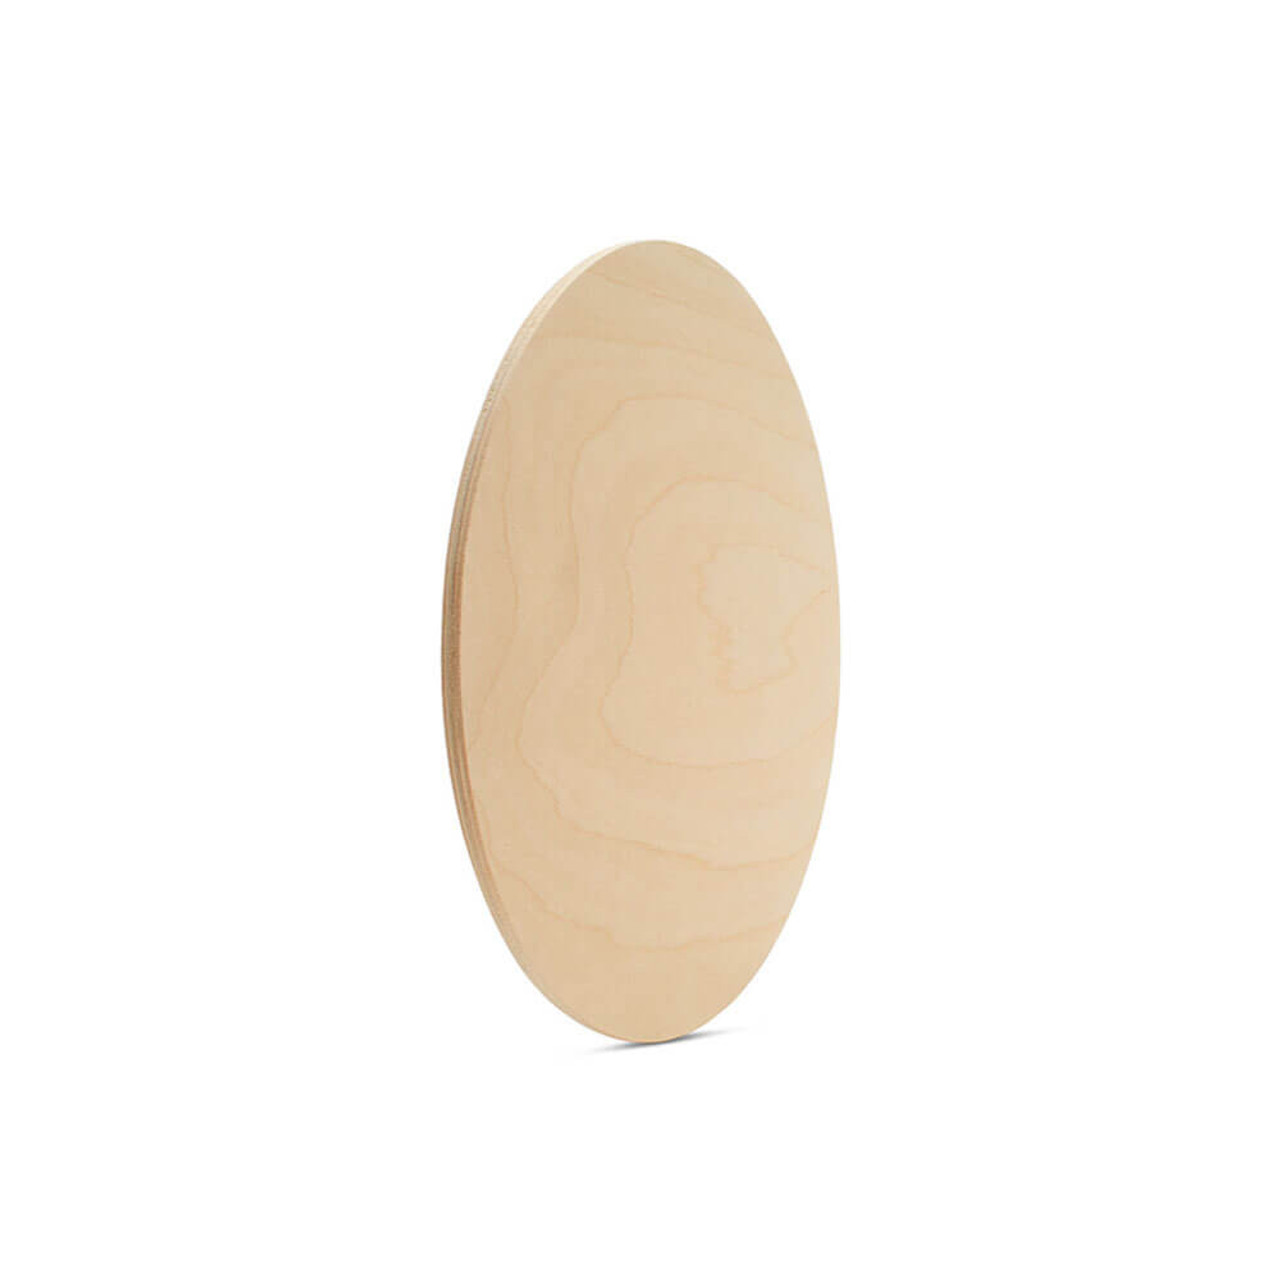 Wood Circles 12 inch, 1/4 inch Thick, Birch Plywood Discs, Pack of 5 Unfinished Wood Circles for Crafts, Wood Rounds by Woodpeckers